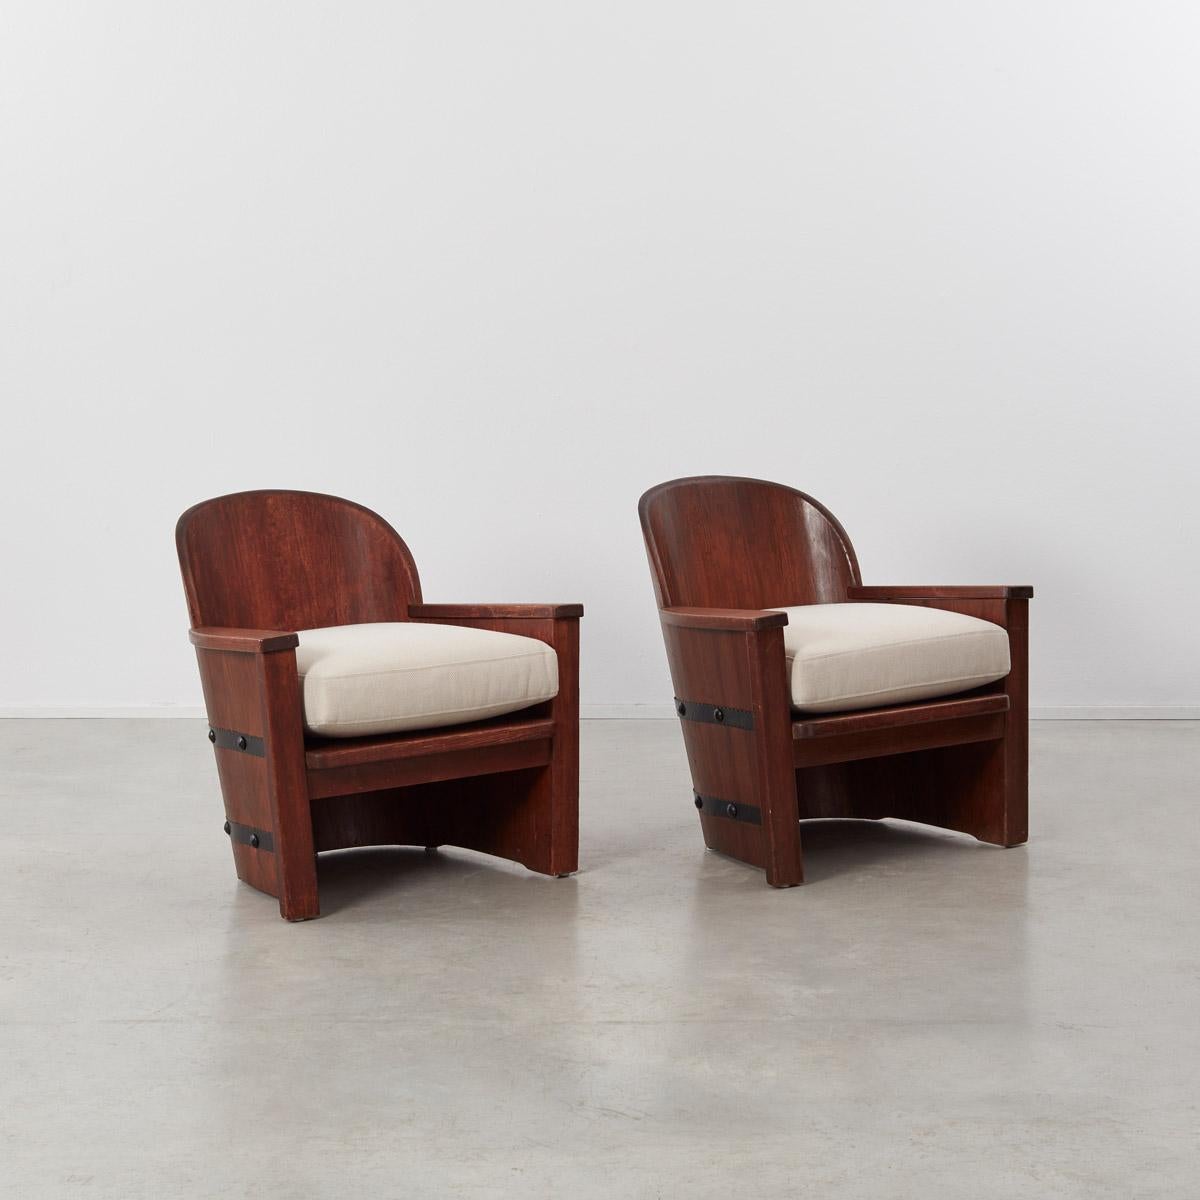 This pair barrel armchairs attributed to Axel Einar Hjorth are made of stained pine bound by studded iron bands. Axel Einar Hjorth was major contributor to the burgeoning Swedish design culture that was recognized internationally in the 1920s. He is